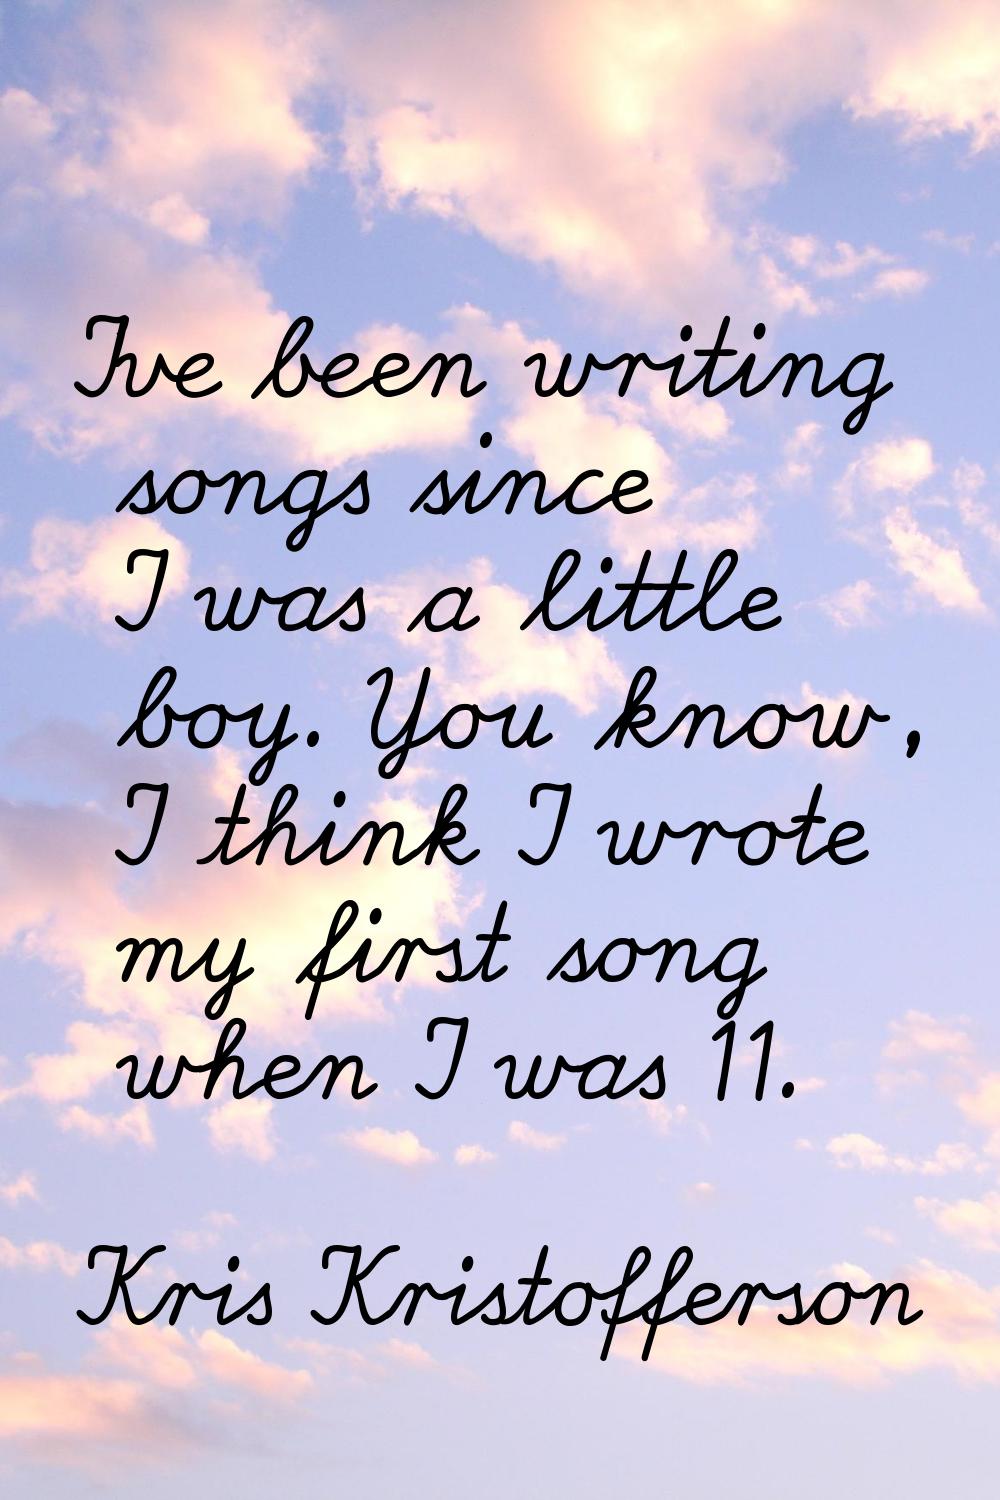 I've been writing songs since I was a little boy. You know, I think I wrote my first song when I wa